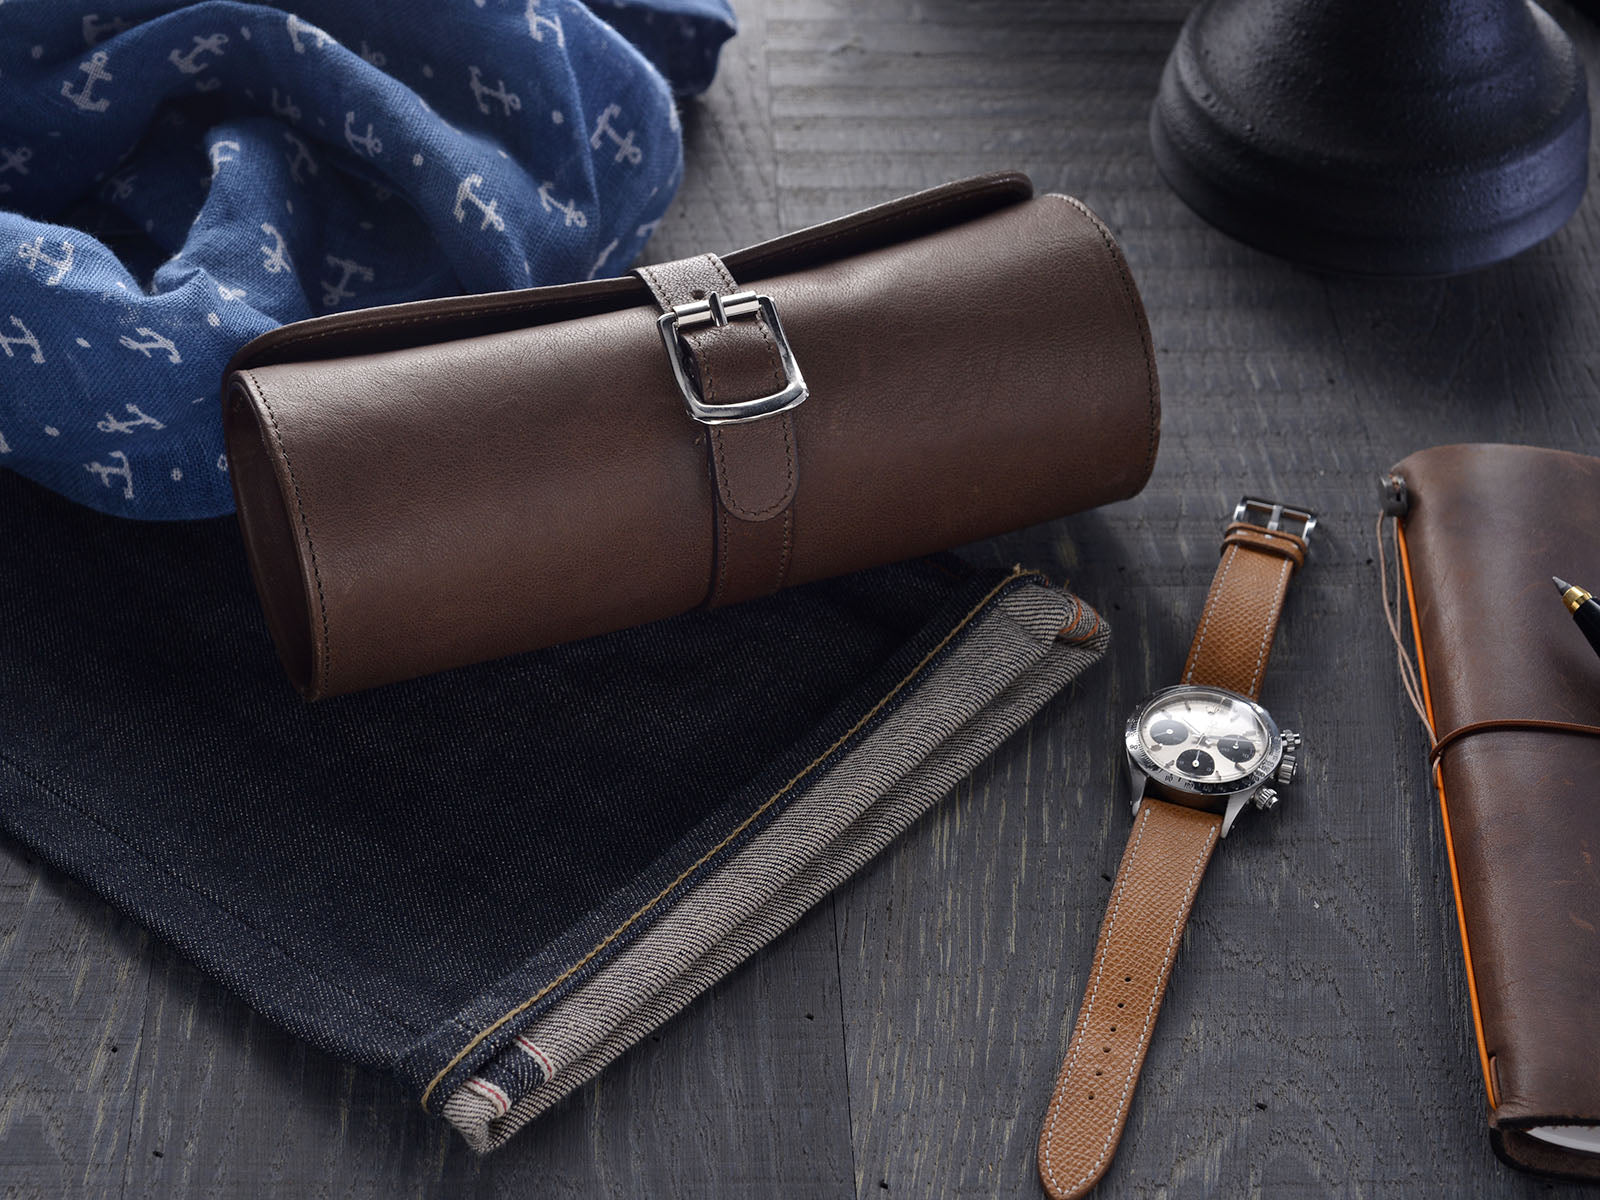 Travel Style - Watch Accessories for the Man on the Move